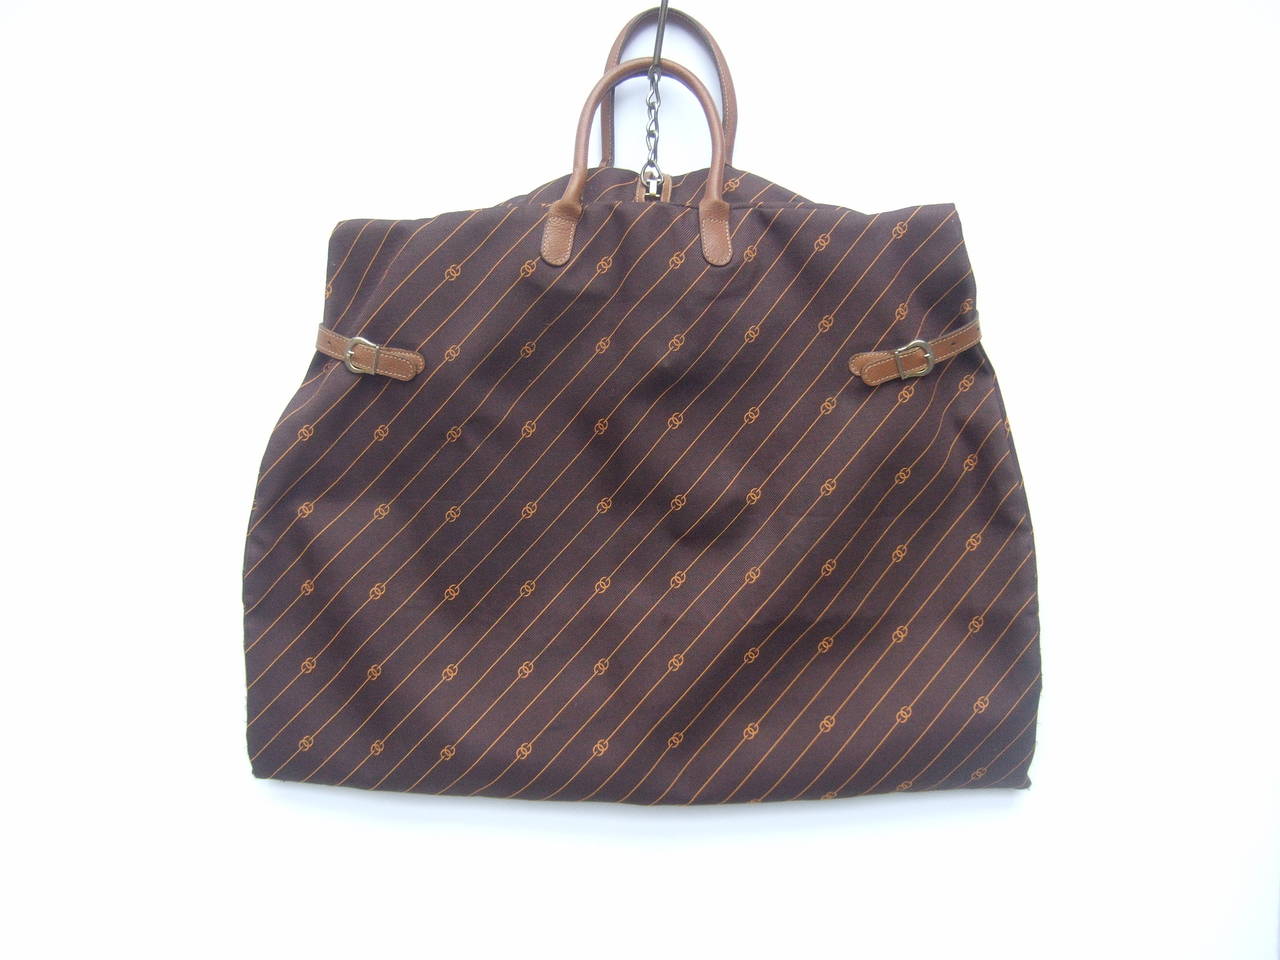 Gucci Brown canvas leather trim garment bag c 1970s
The stylish designer garment bag is designed with brown canvas with Gucci's interlocked initials repeated throughout. The handles & latch buckles are light brown leather

The versatile Italian